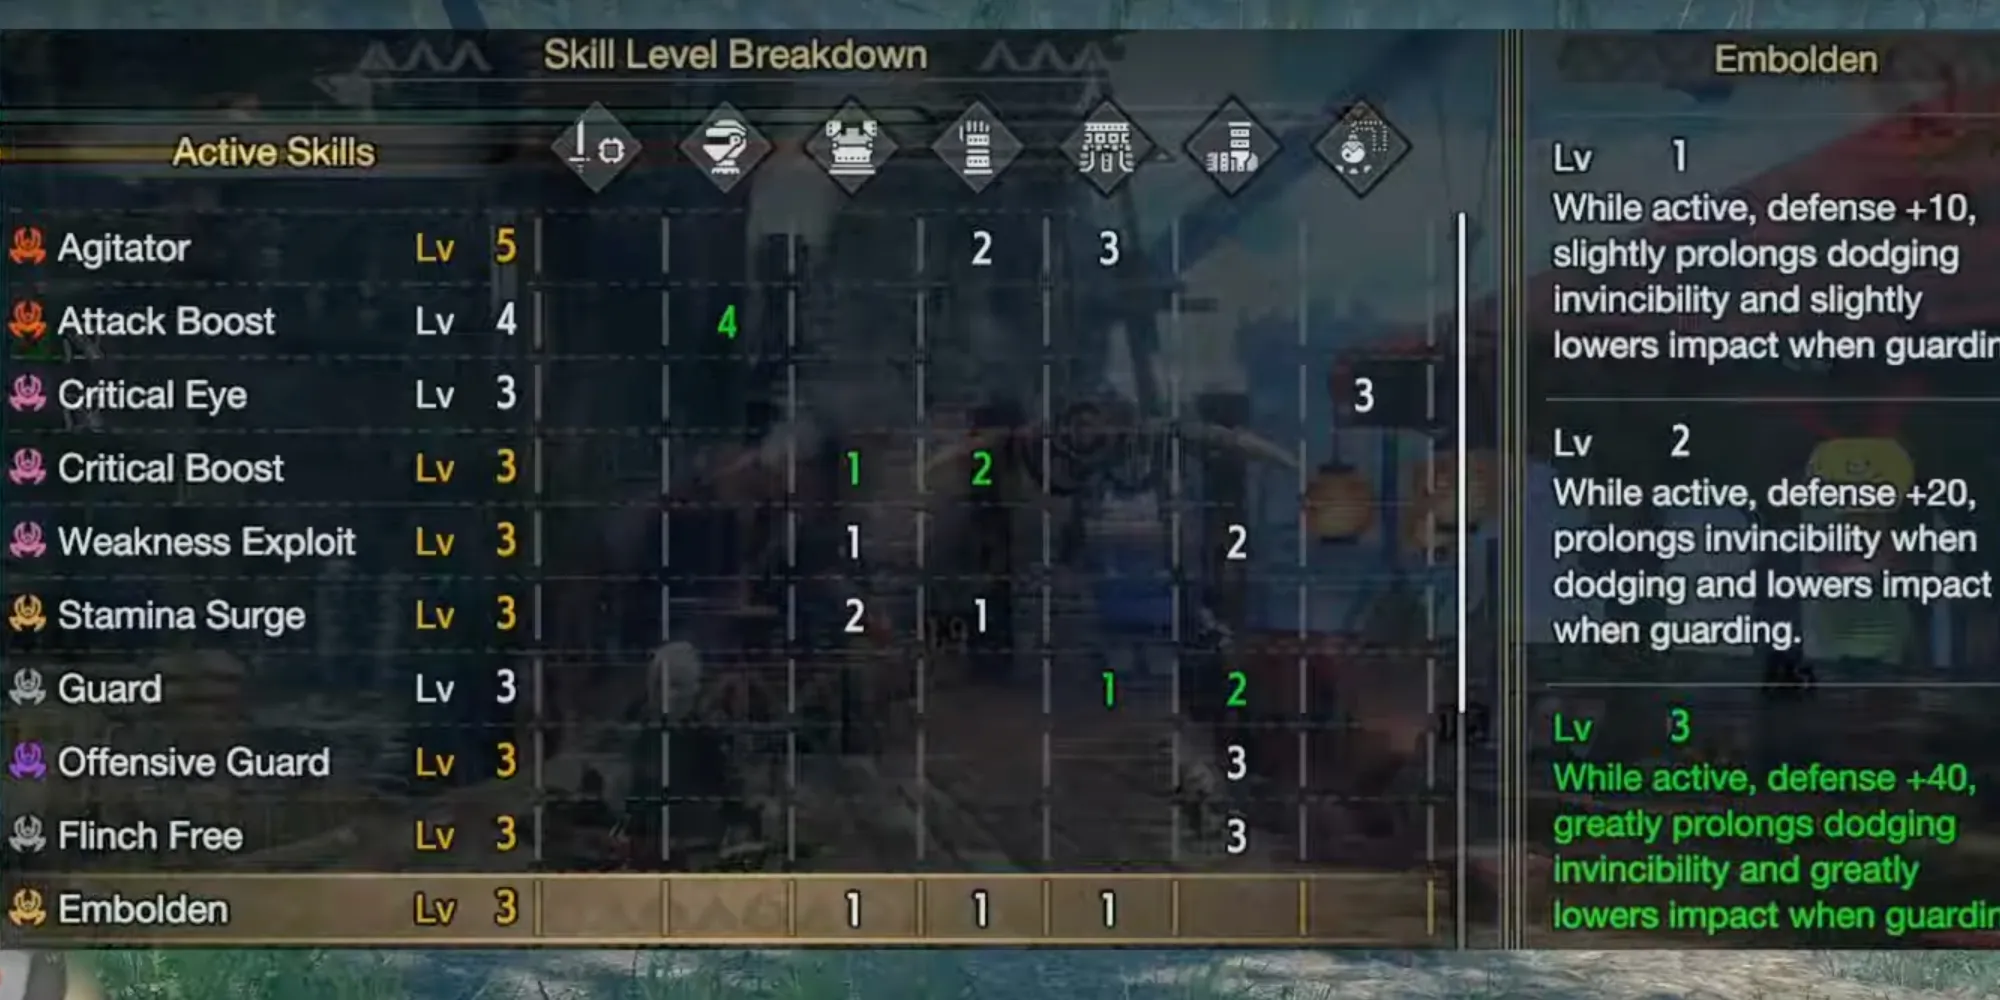 The Embolden SnS build skill loadout in a menu